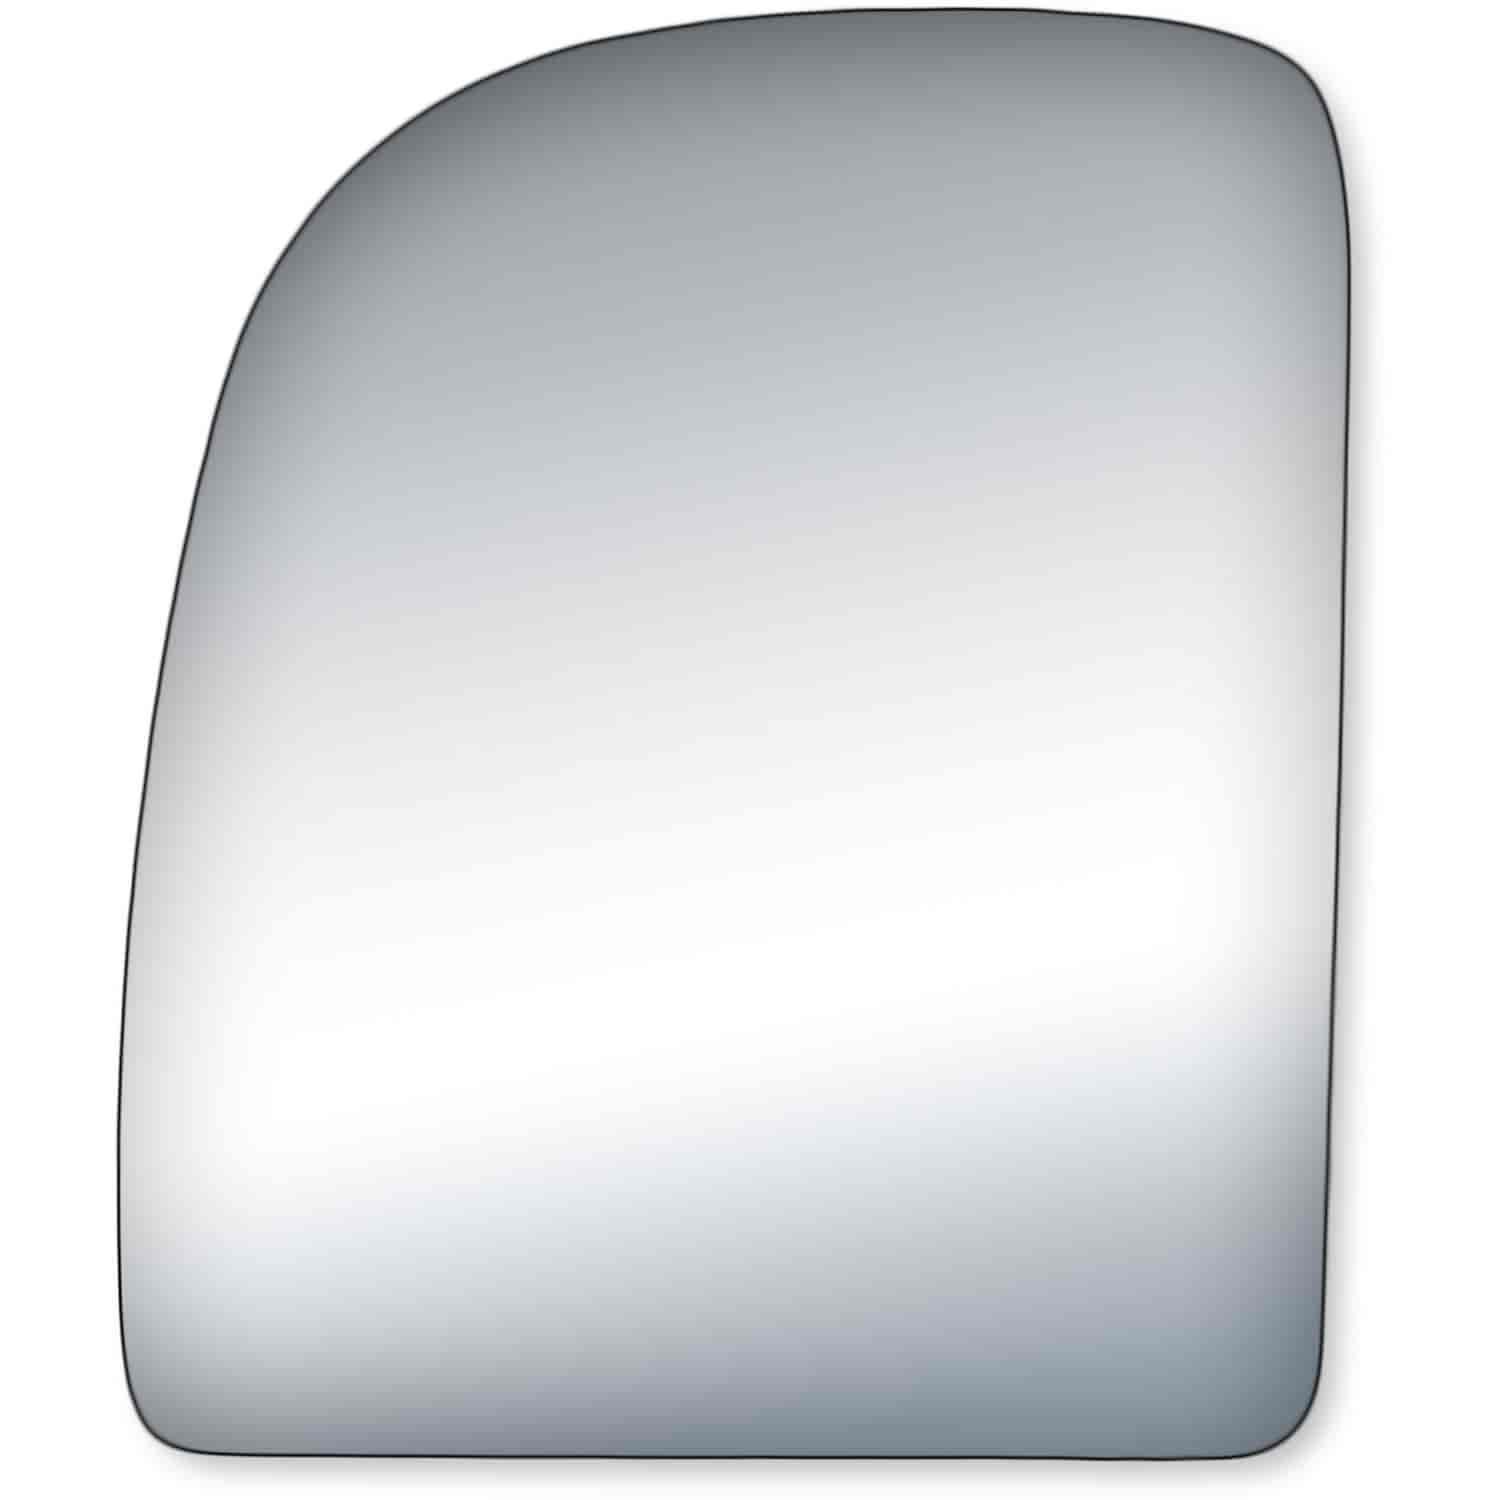 Replacement Glass for 08-14 Econoline towing mirror top lens ; 99-05 Excursion towing mirror top len